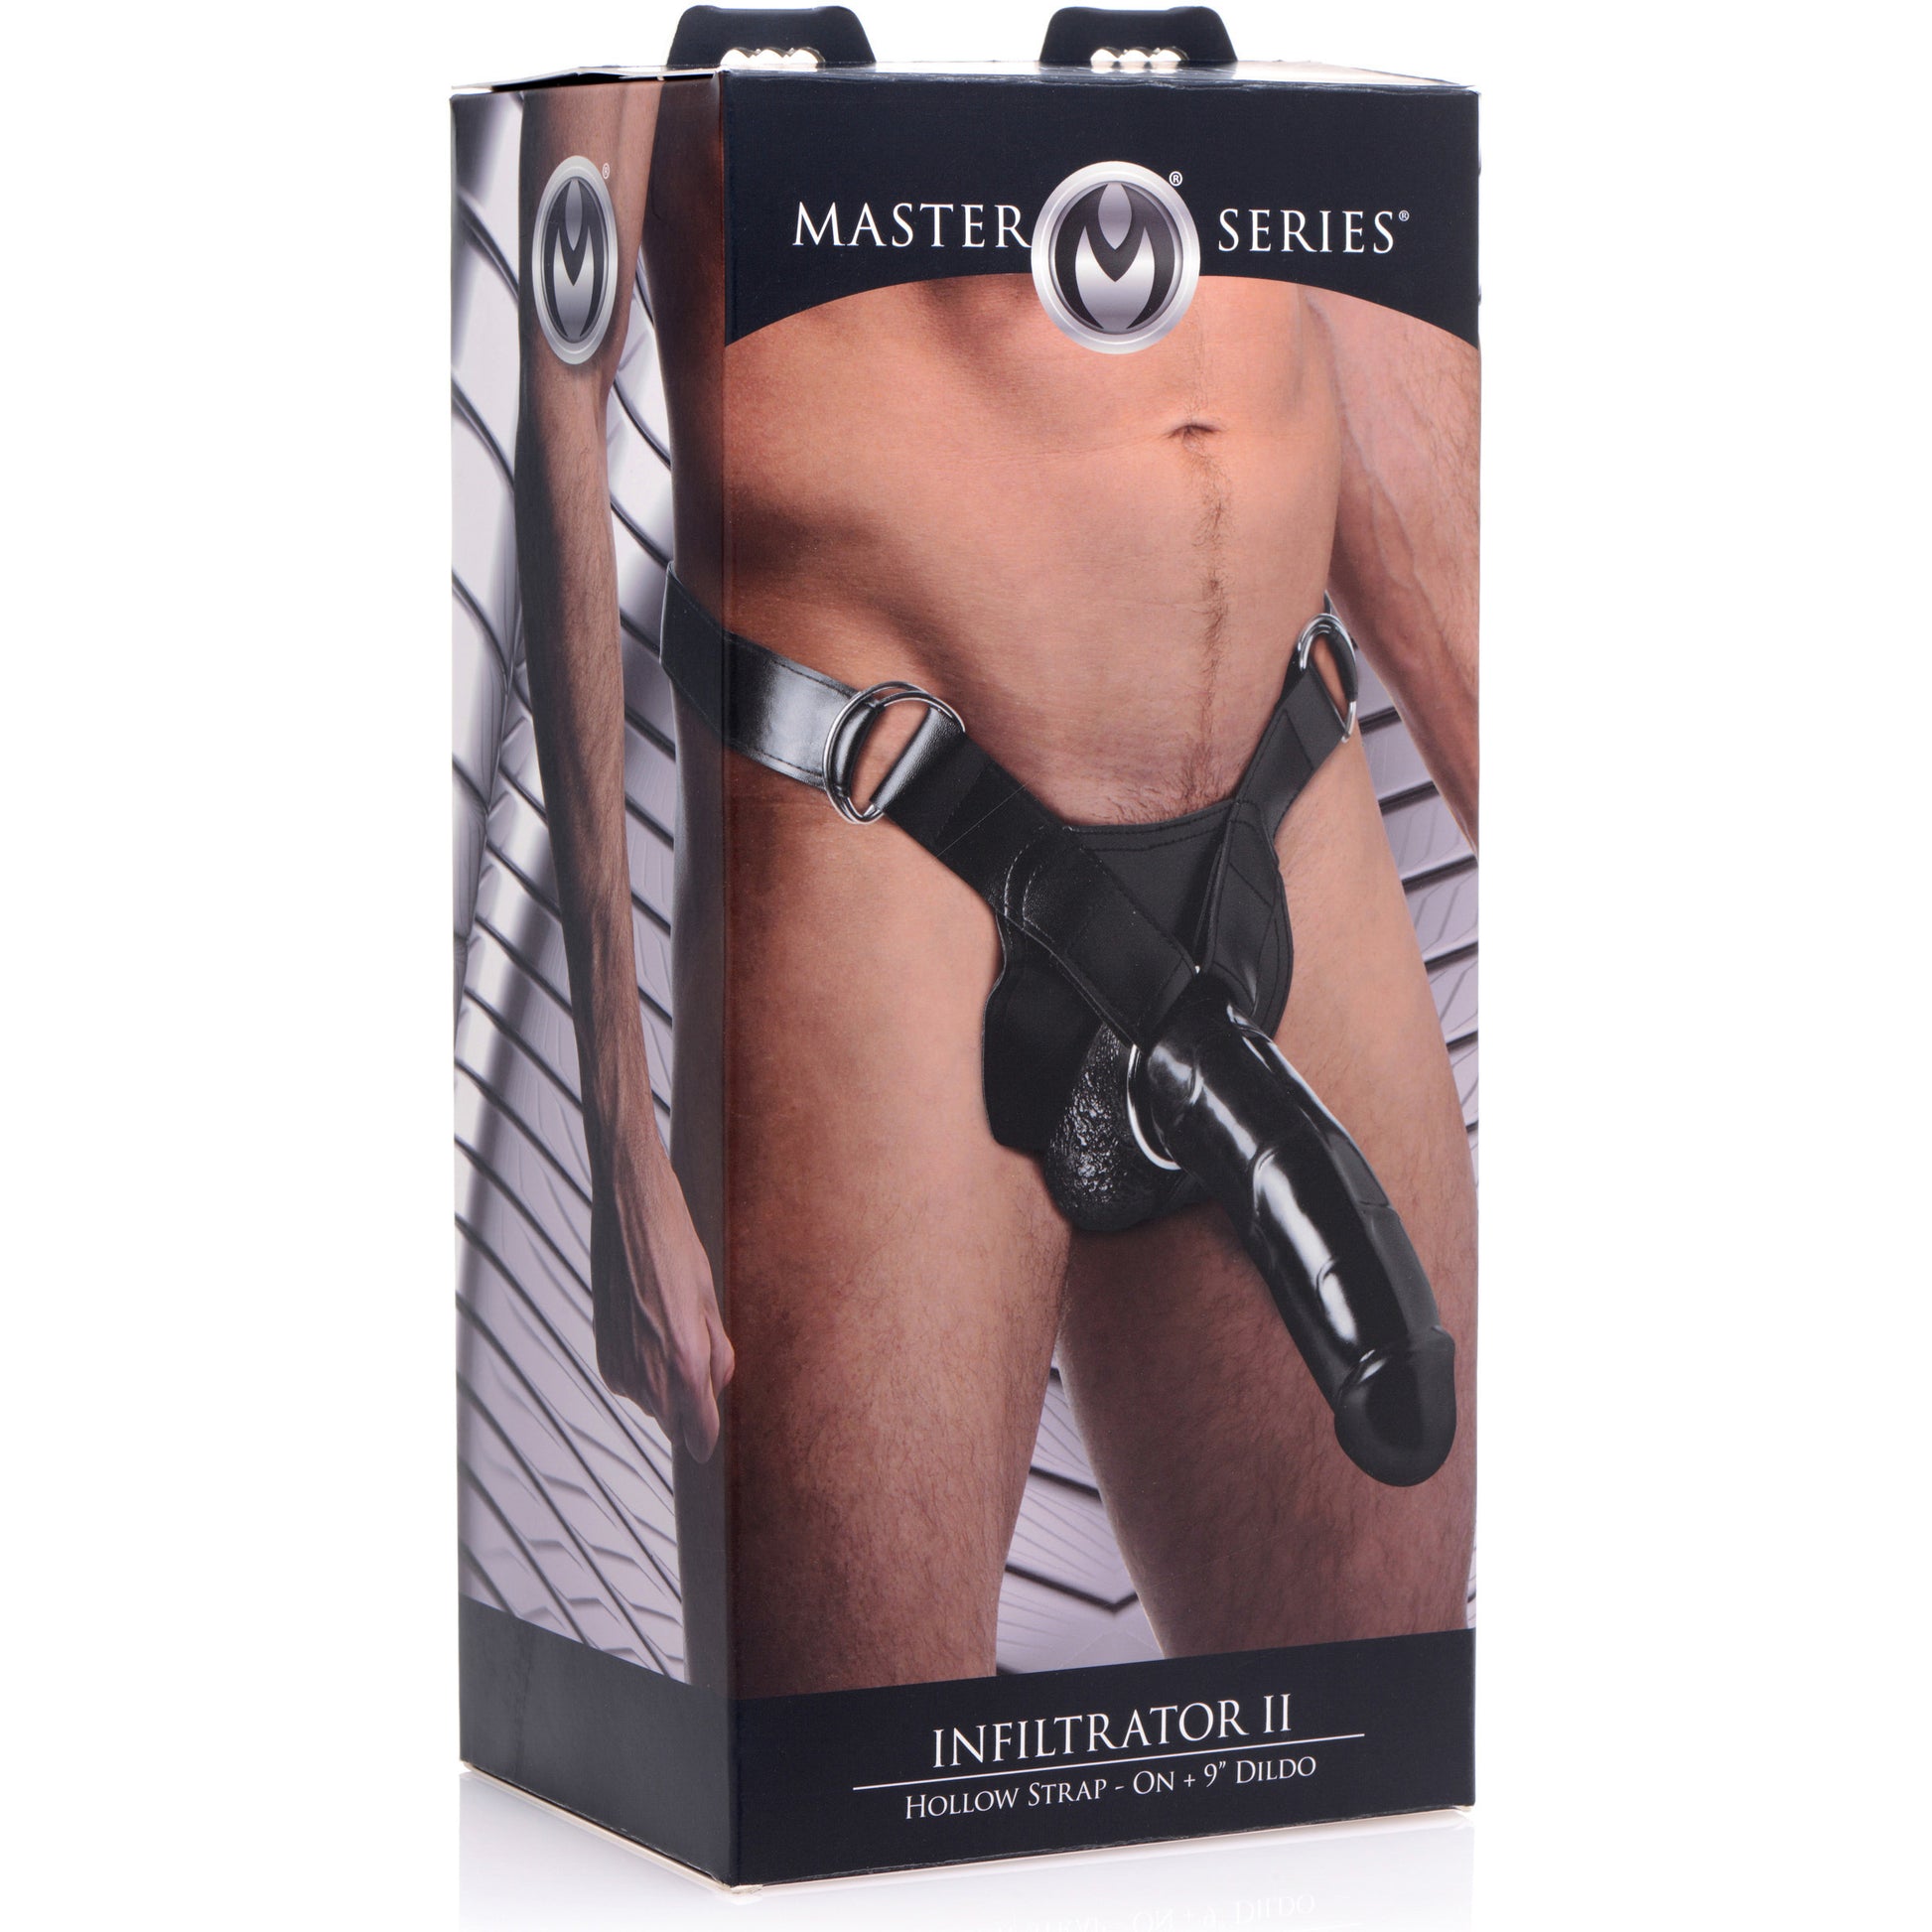 Infiltrator II Hollow Strap-On with 9 Inch Dildo - UABDSM